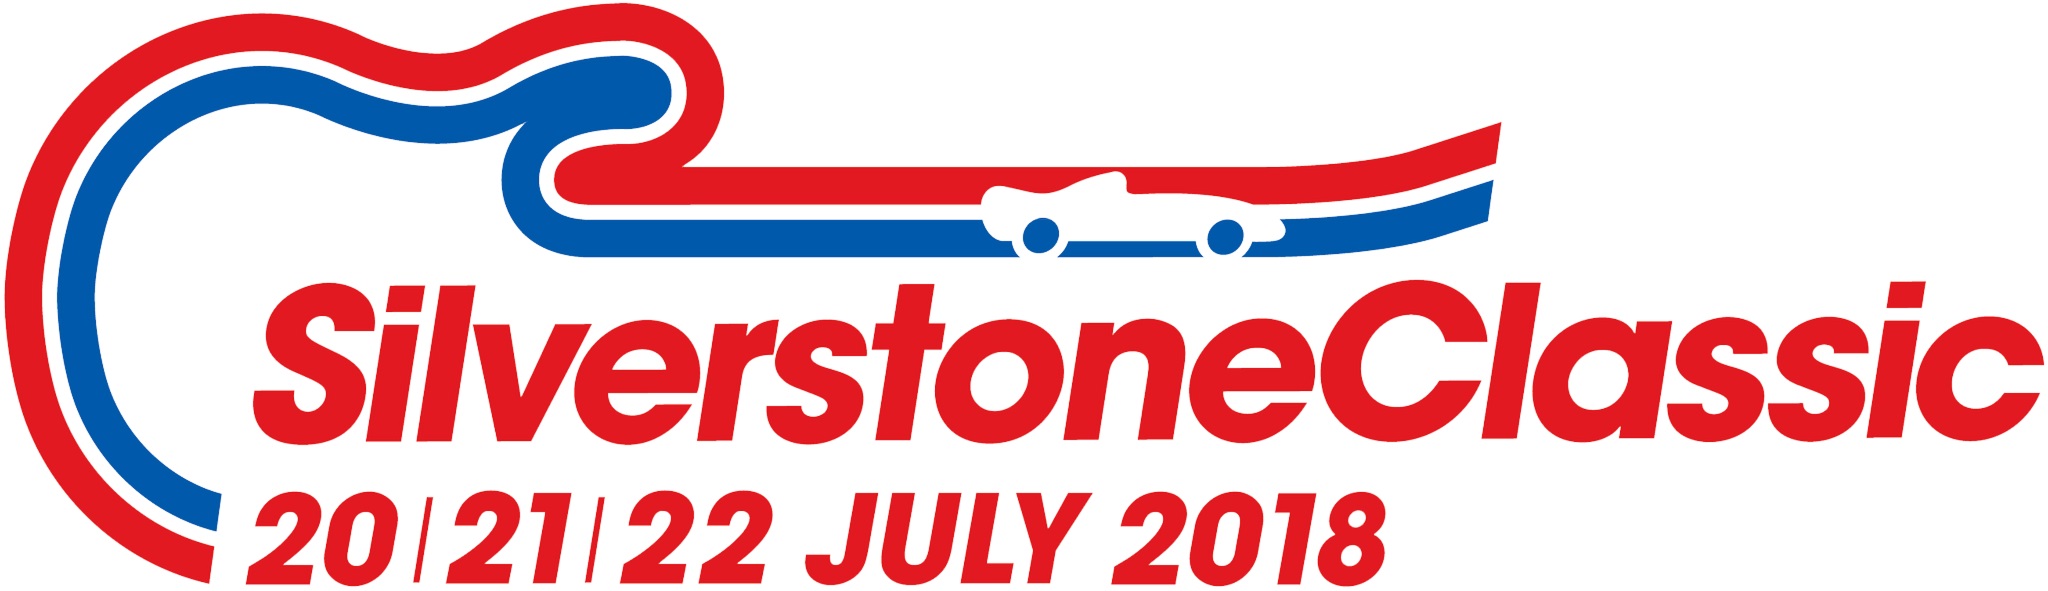 Super Early Bird Display Packages for Silverstone Classic cover